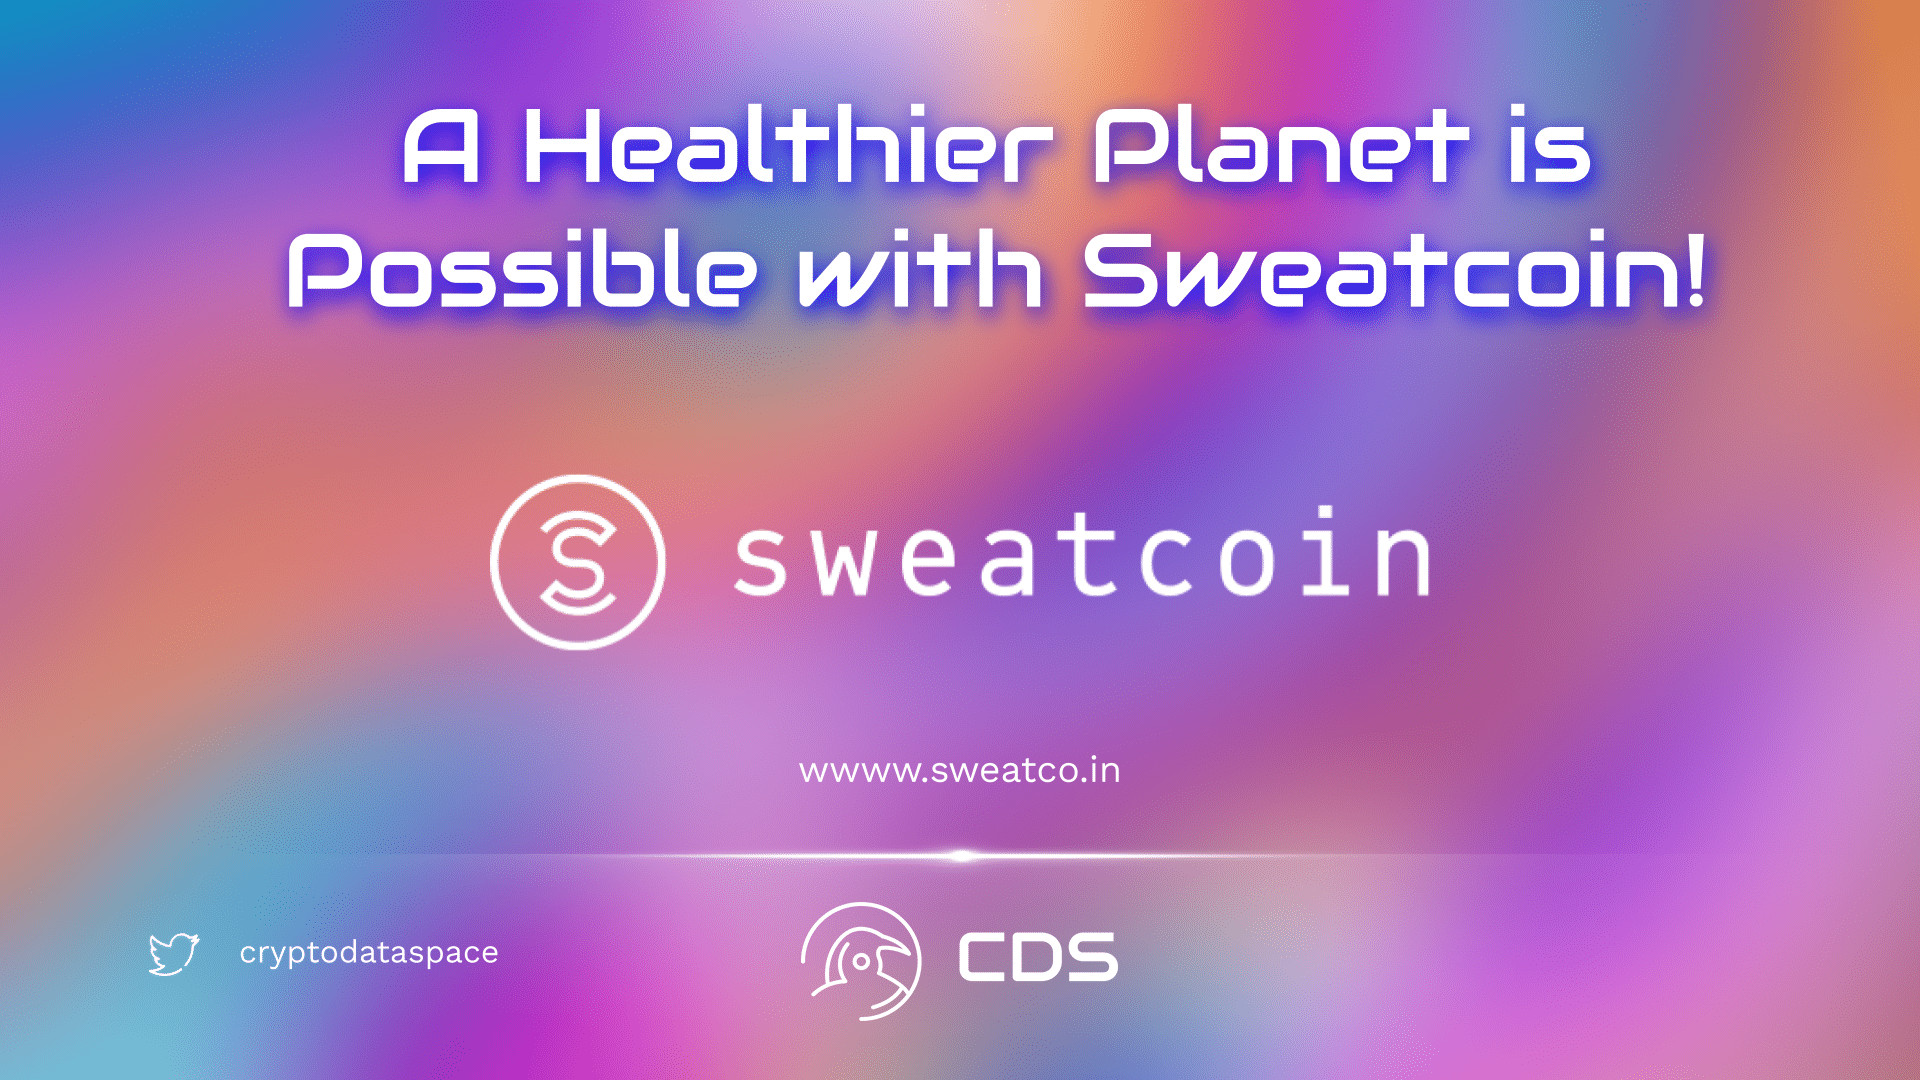 A Healthier Planet is Possible with Sweatcoin!